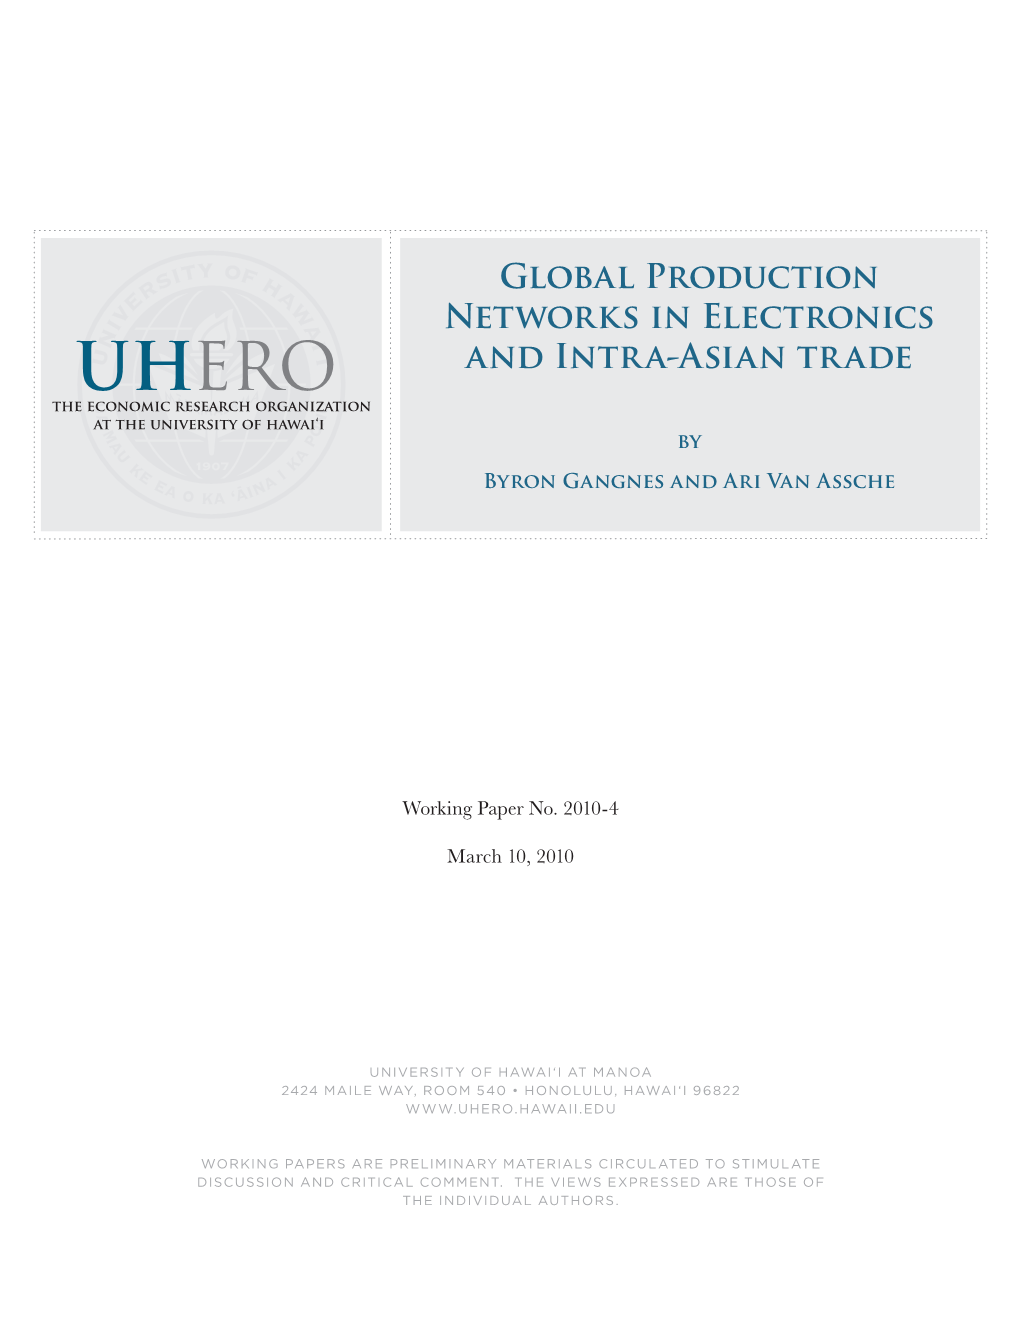 Global Production Networks in Electronics and Intra-Asian Trade